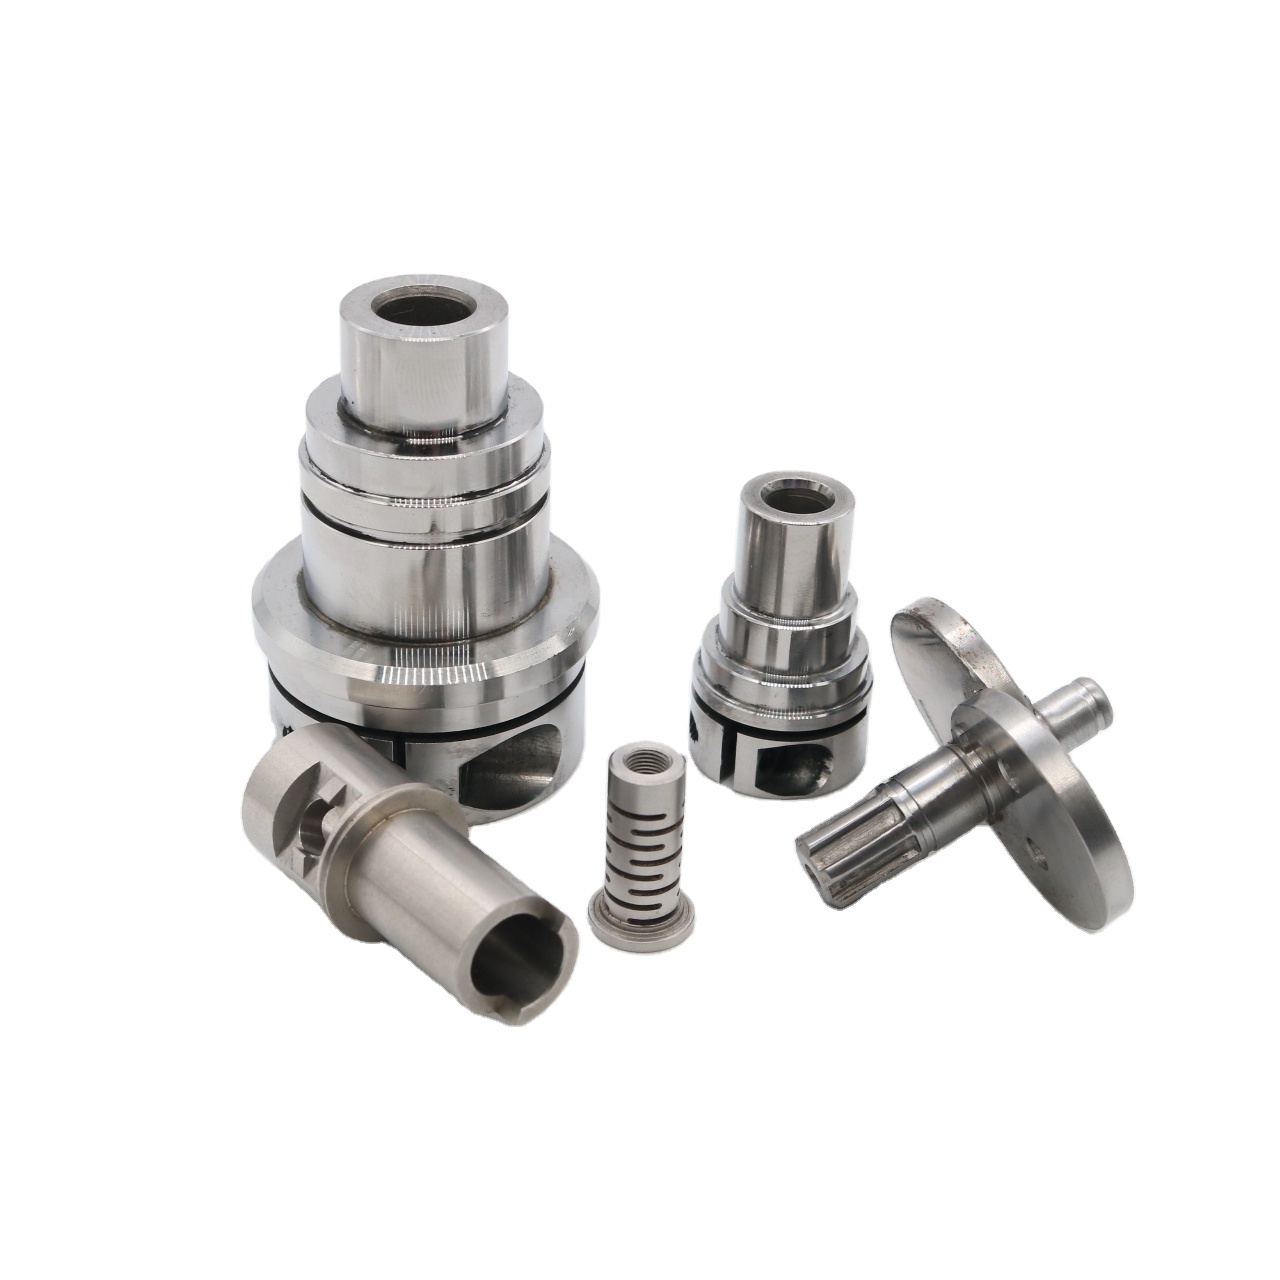 OEM High Precision CNC Machining Parts Service Featured Image